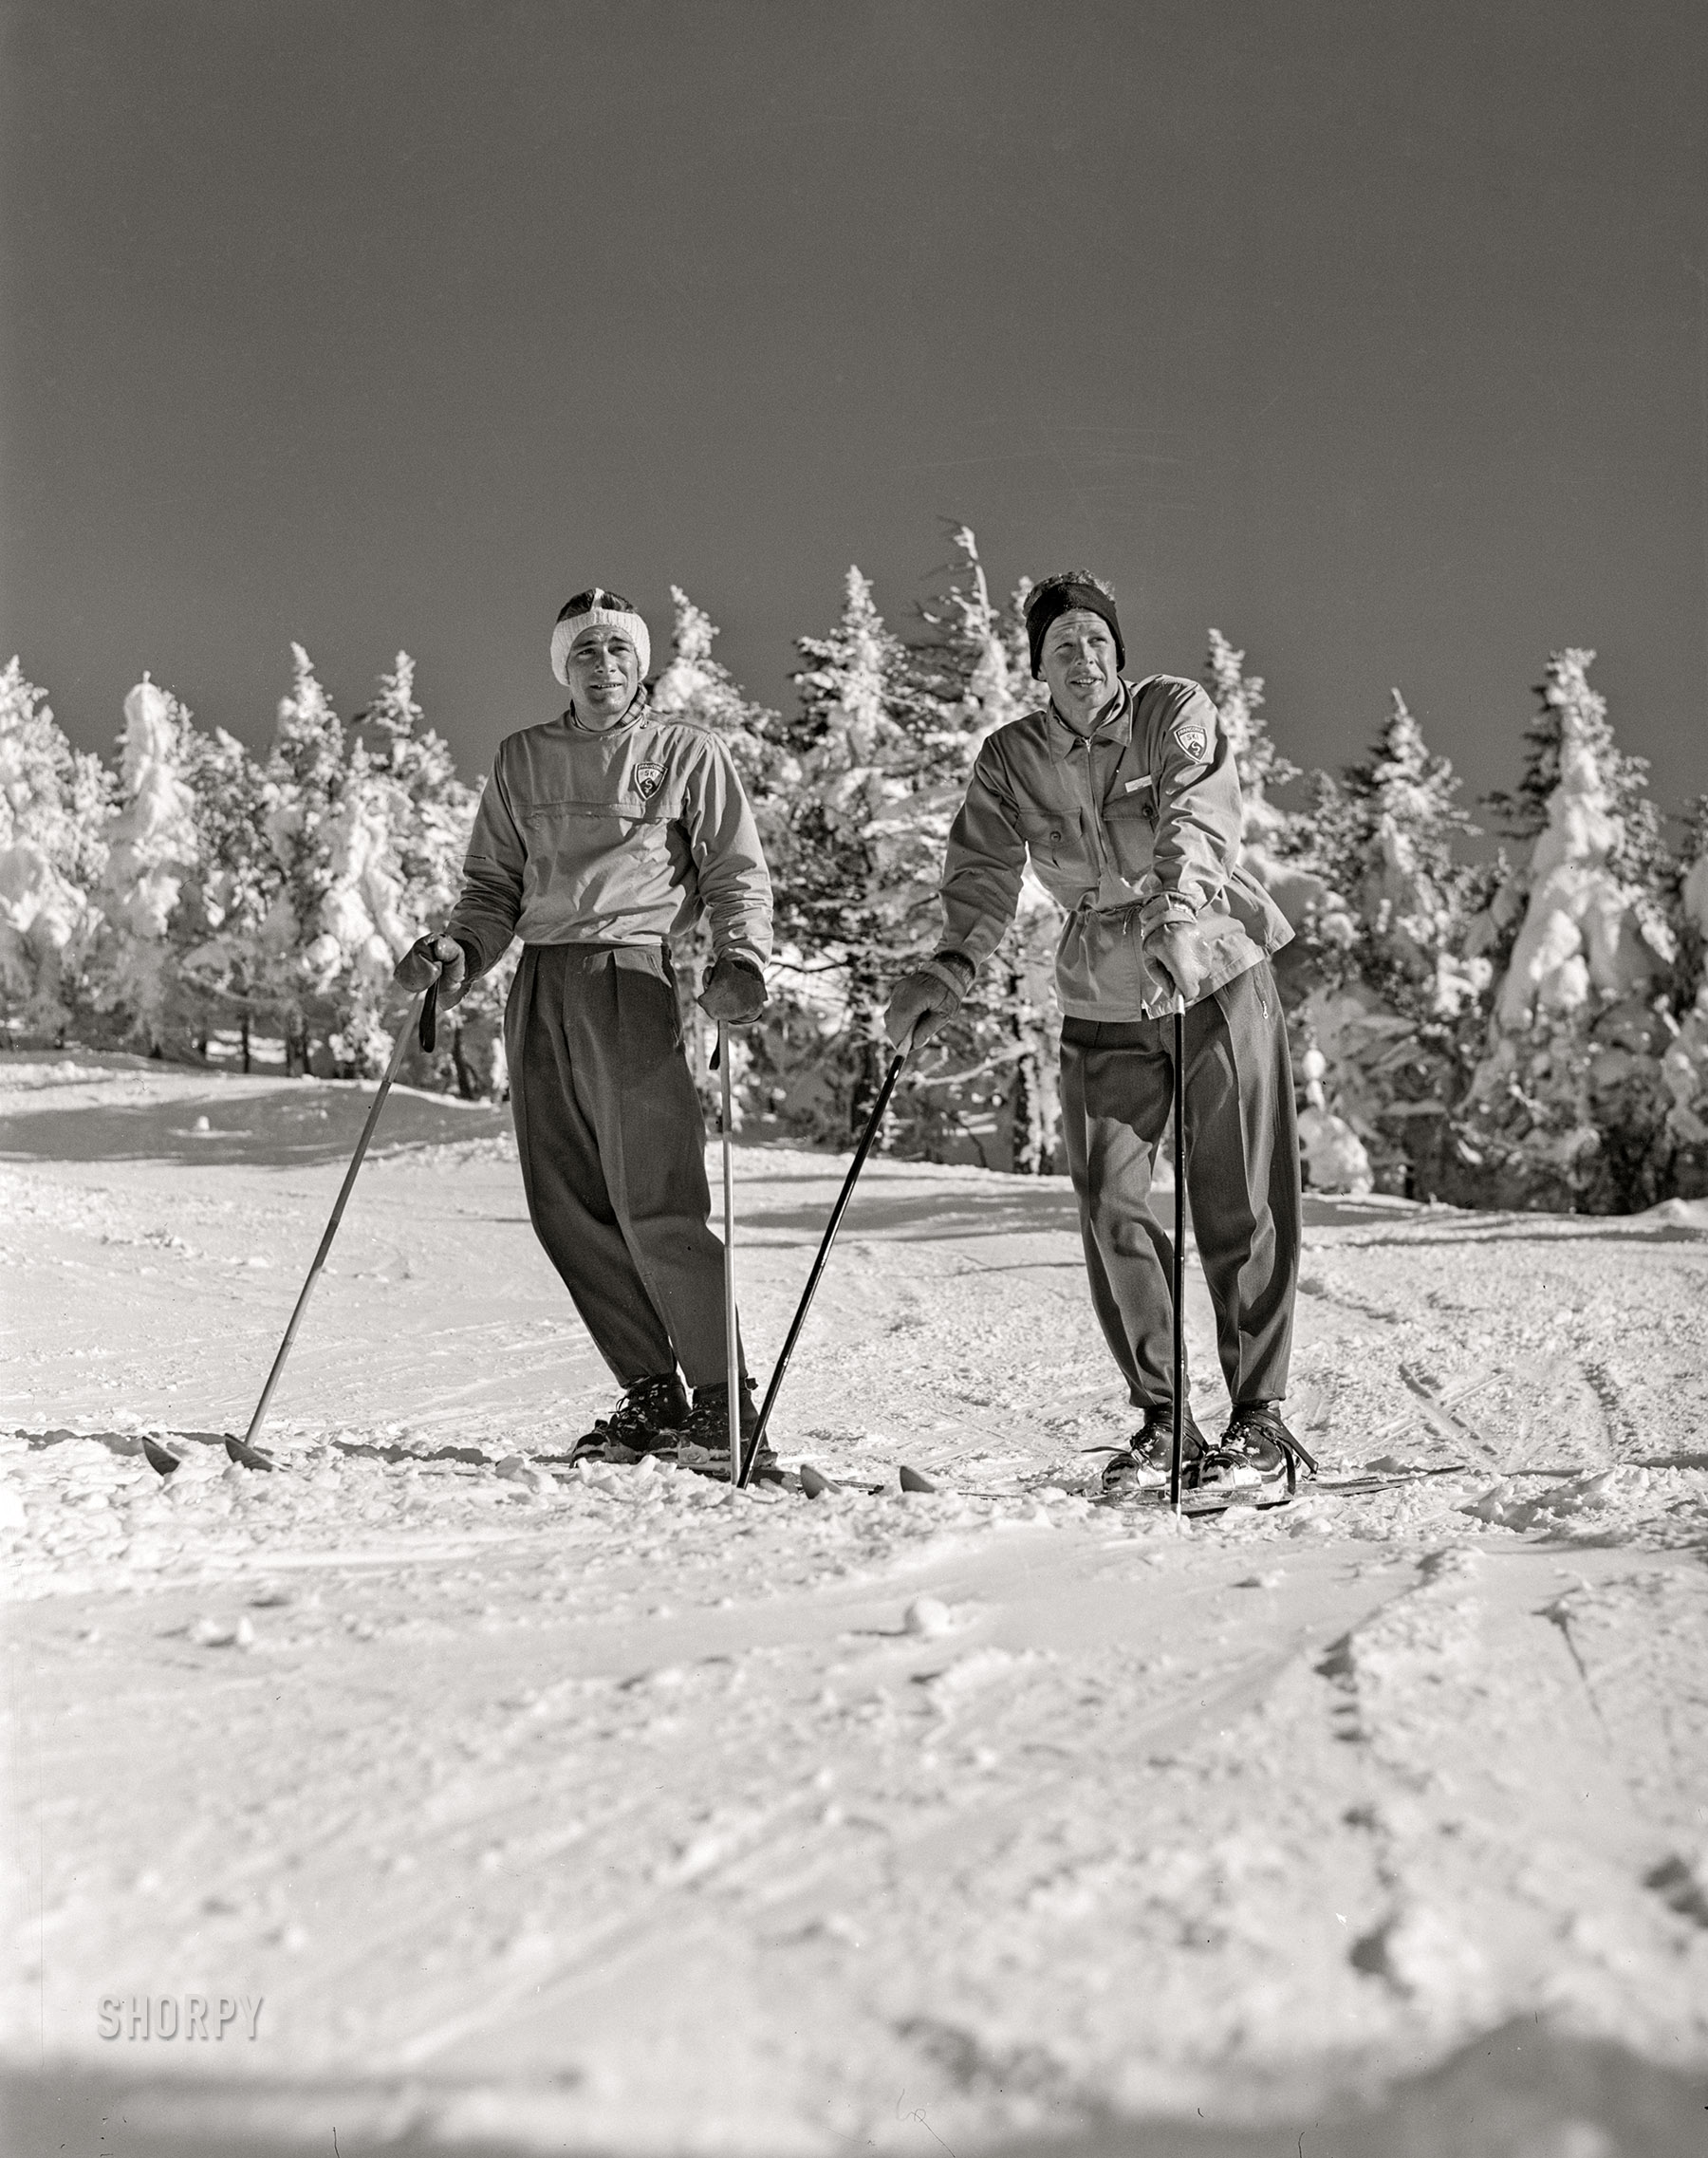 March 1940. "Skiers on top of Cannon Mountain. Franconia Notch, New Hampshire." Acetate negative by Marion Post Wolcott for the Farm Security Administration. View full size.